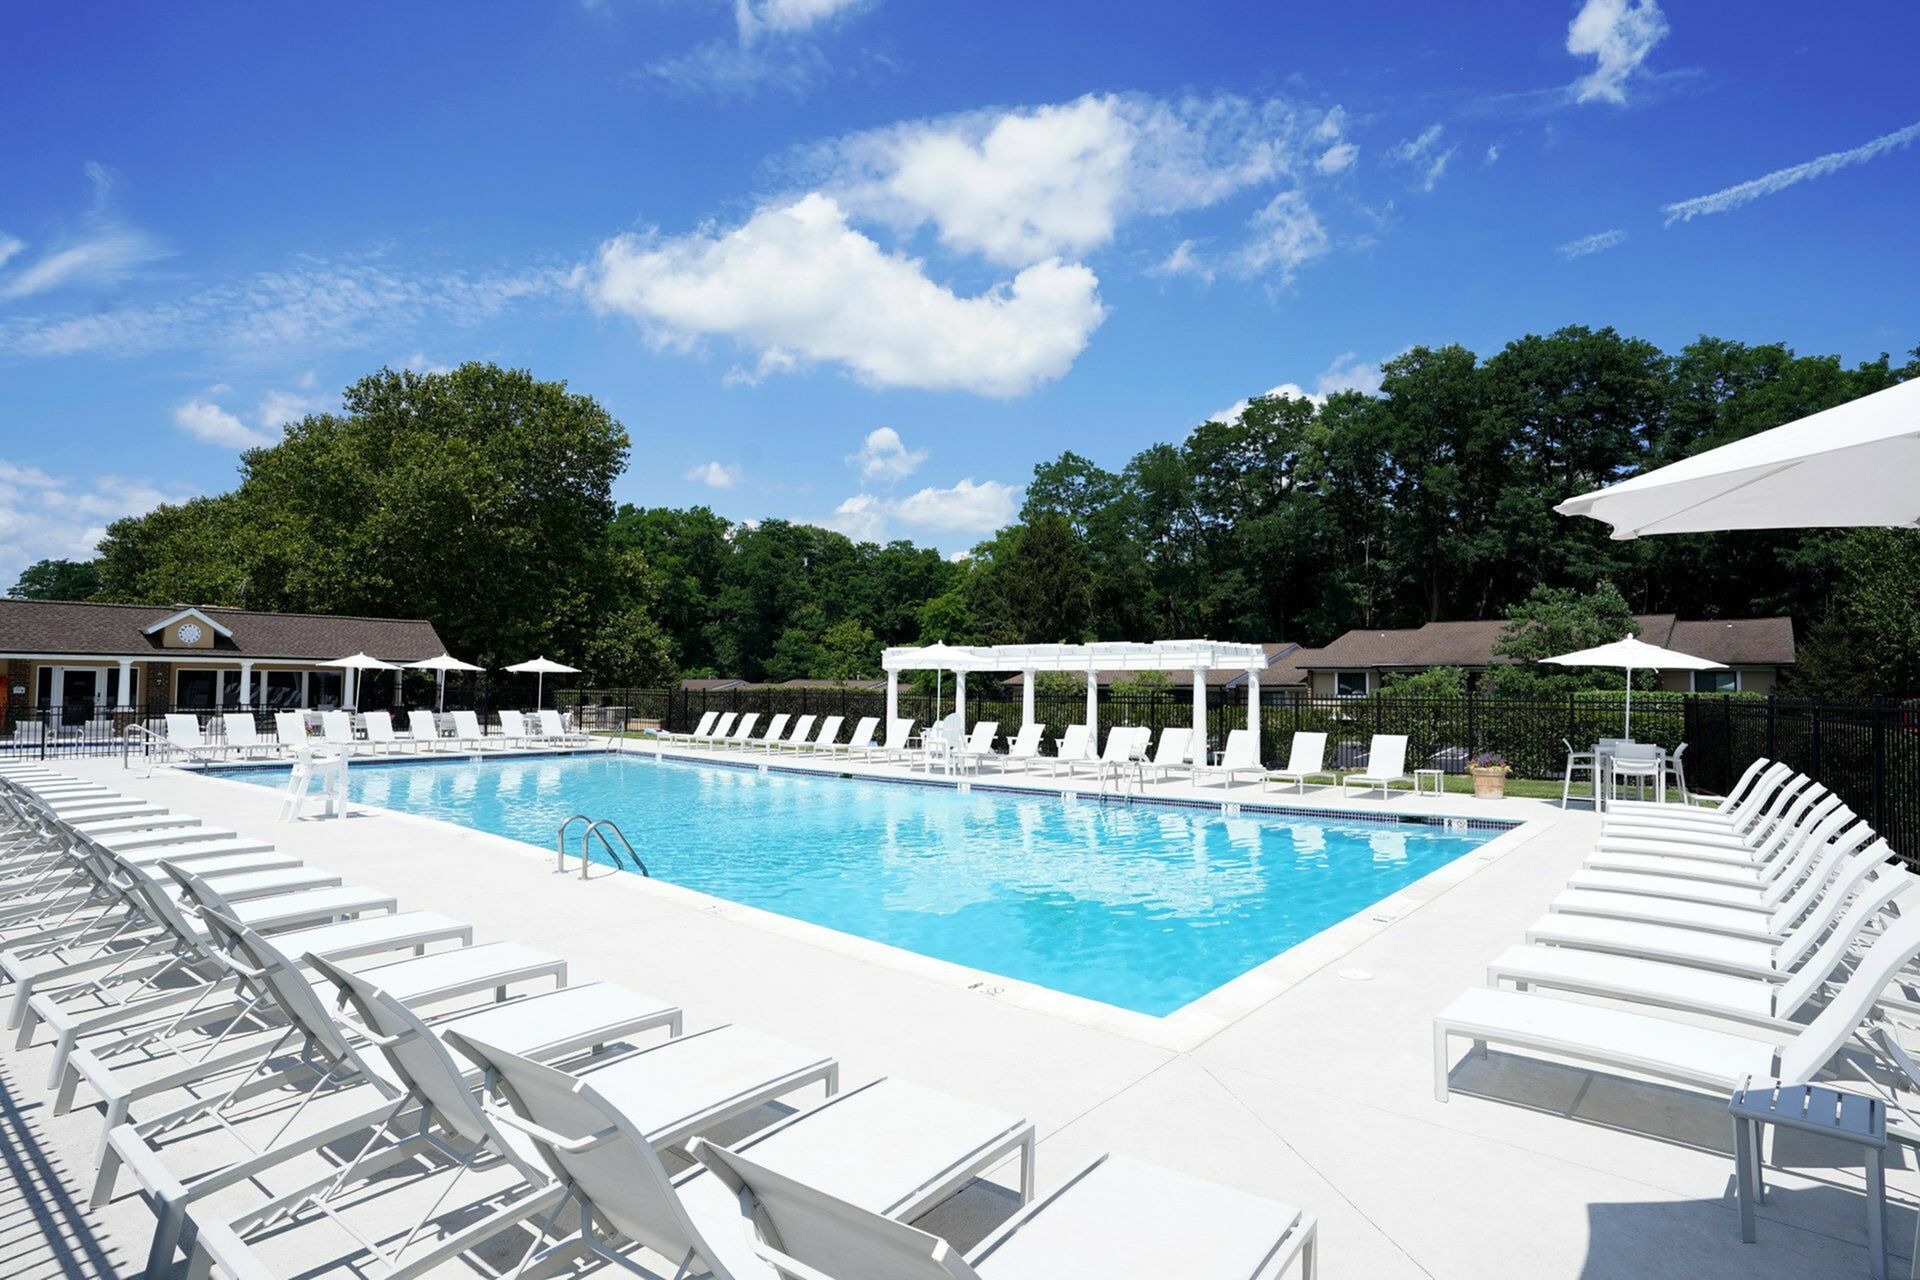 West Chester, PA Apartments for Rent - Audubon Pointe - Gated Sparkling Pool Surrounded by Lounge Chairs, Tables with Umbrellas, and Large Trees in the Background